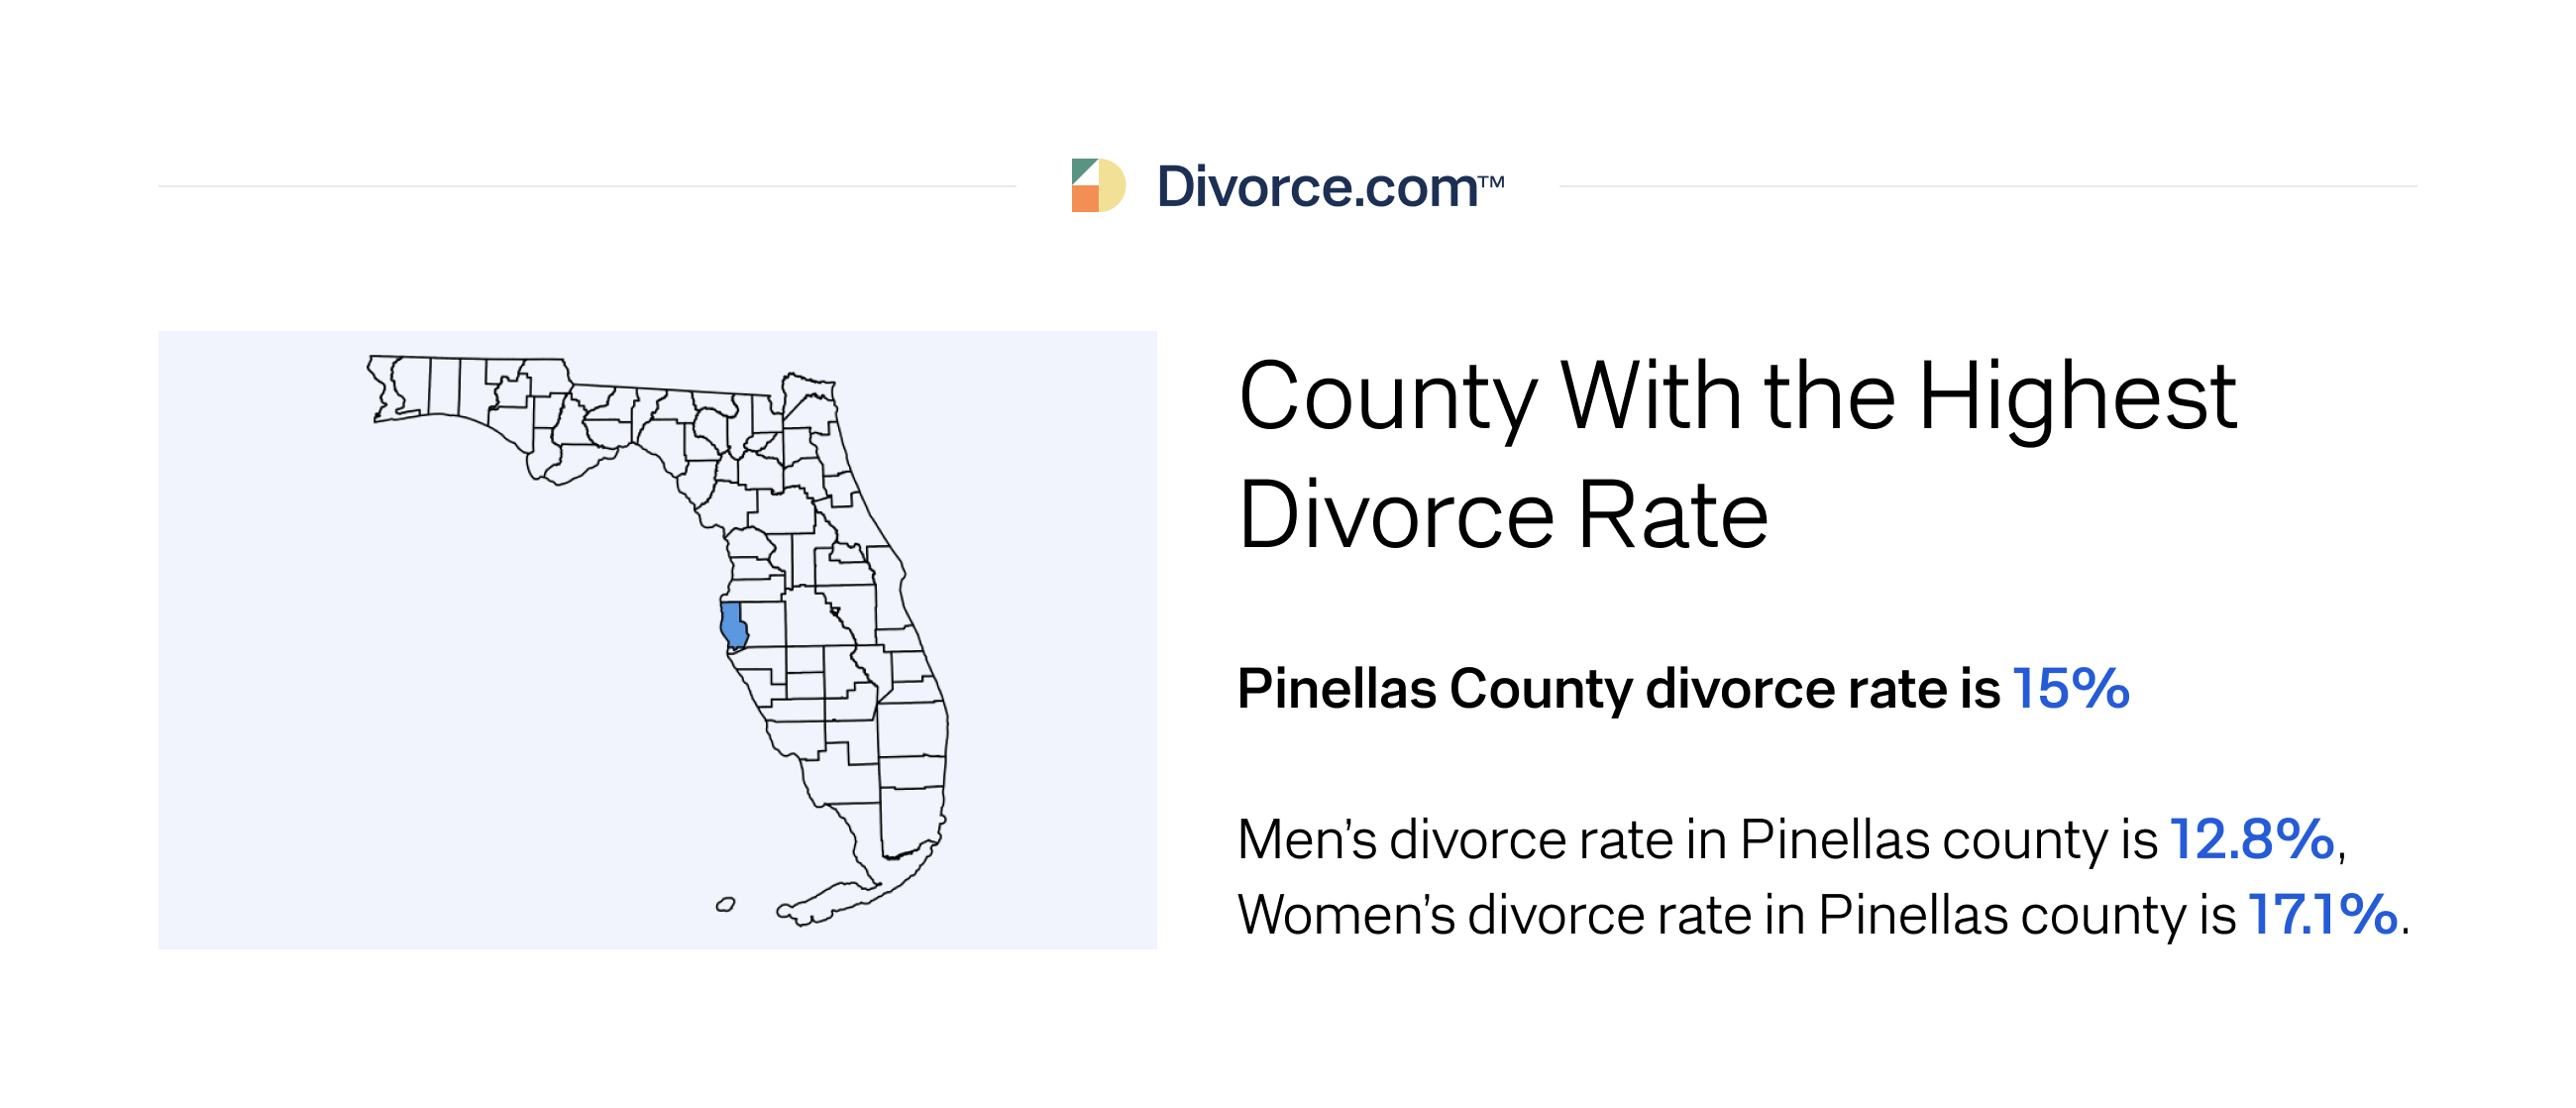 County With the Highest Divorce Rate